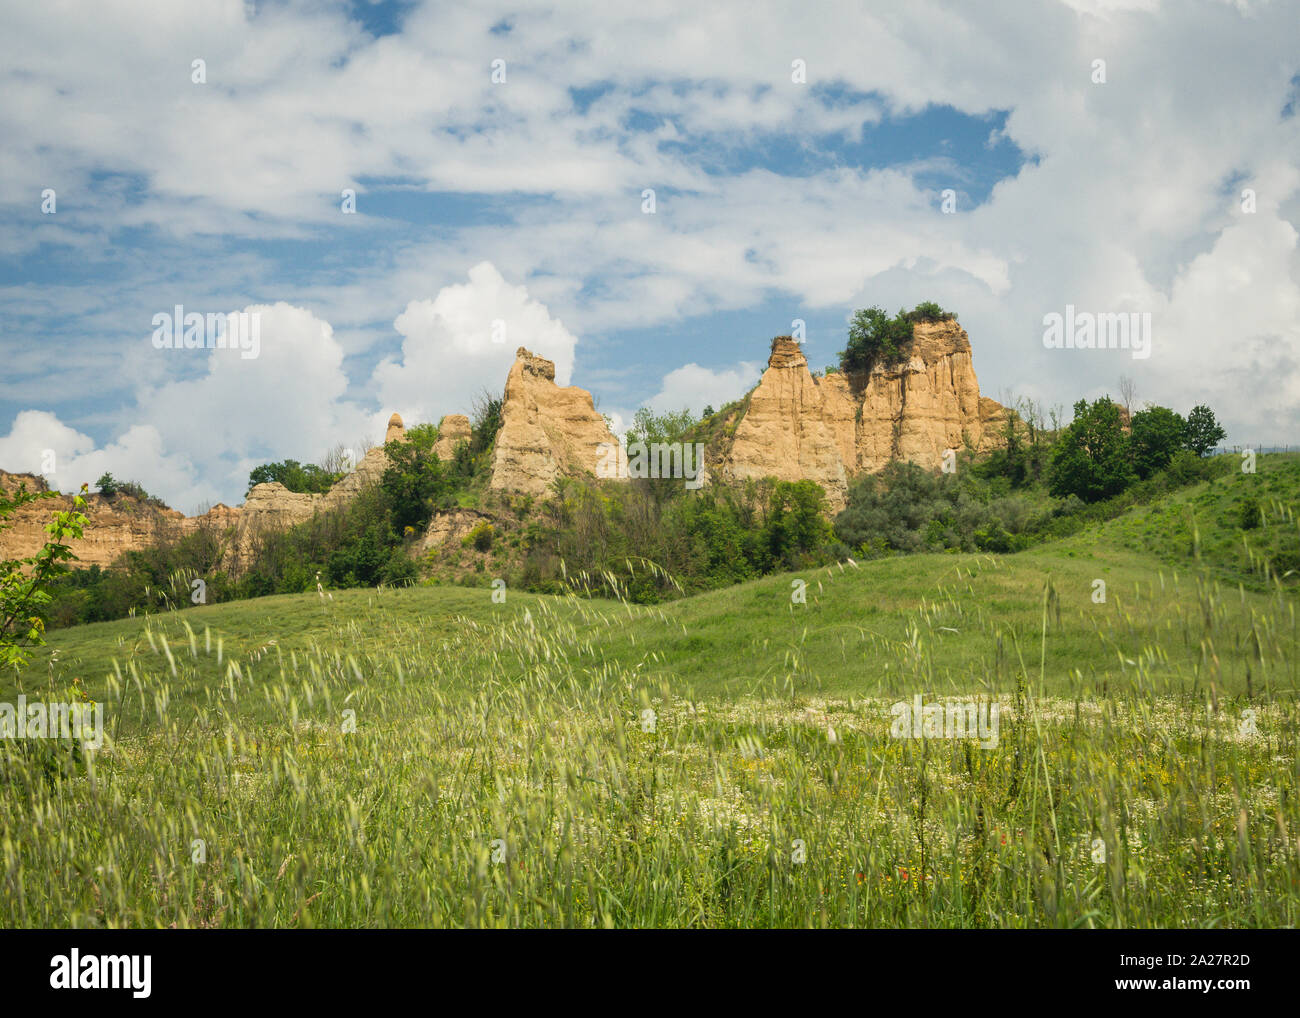 View of Le Balze canyon landscape in Valdarno, Italy Stock Photo